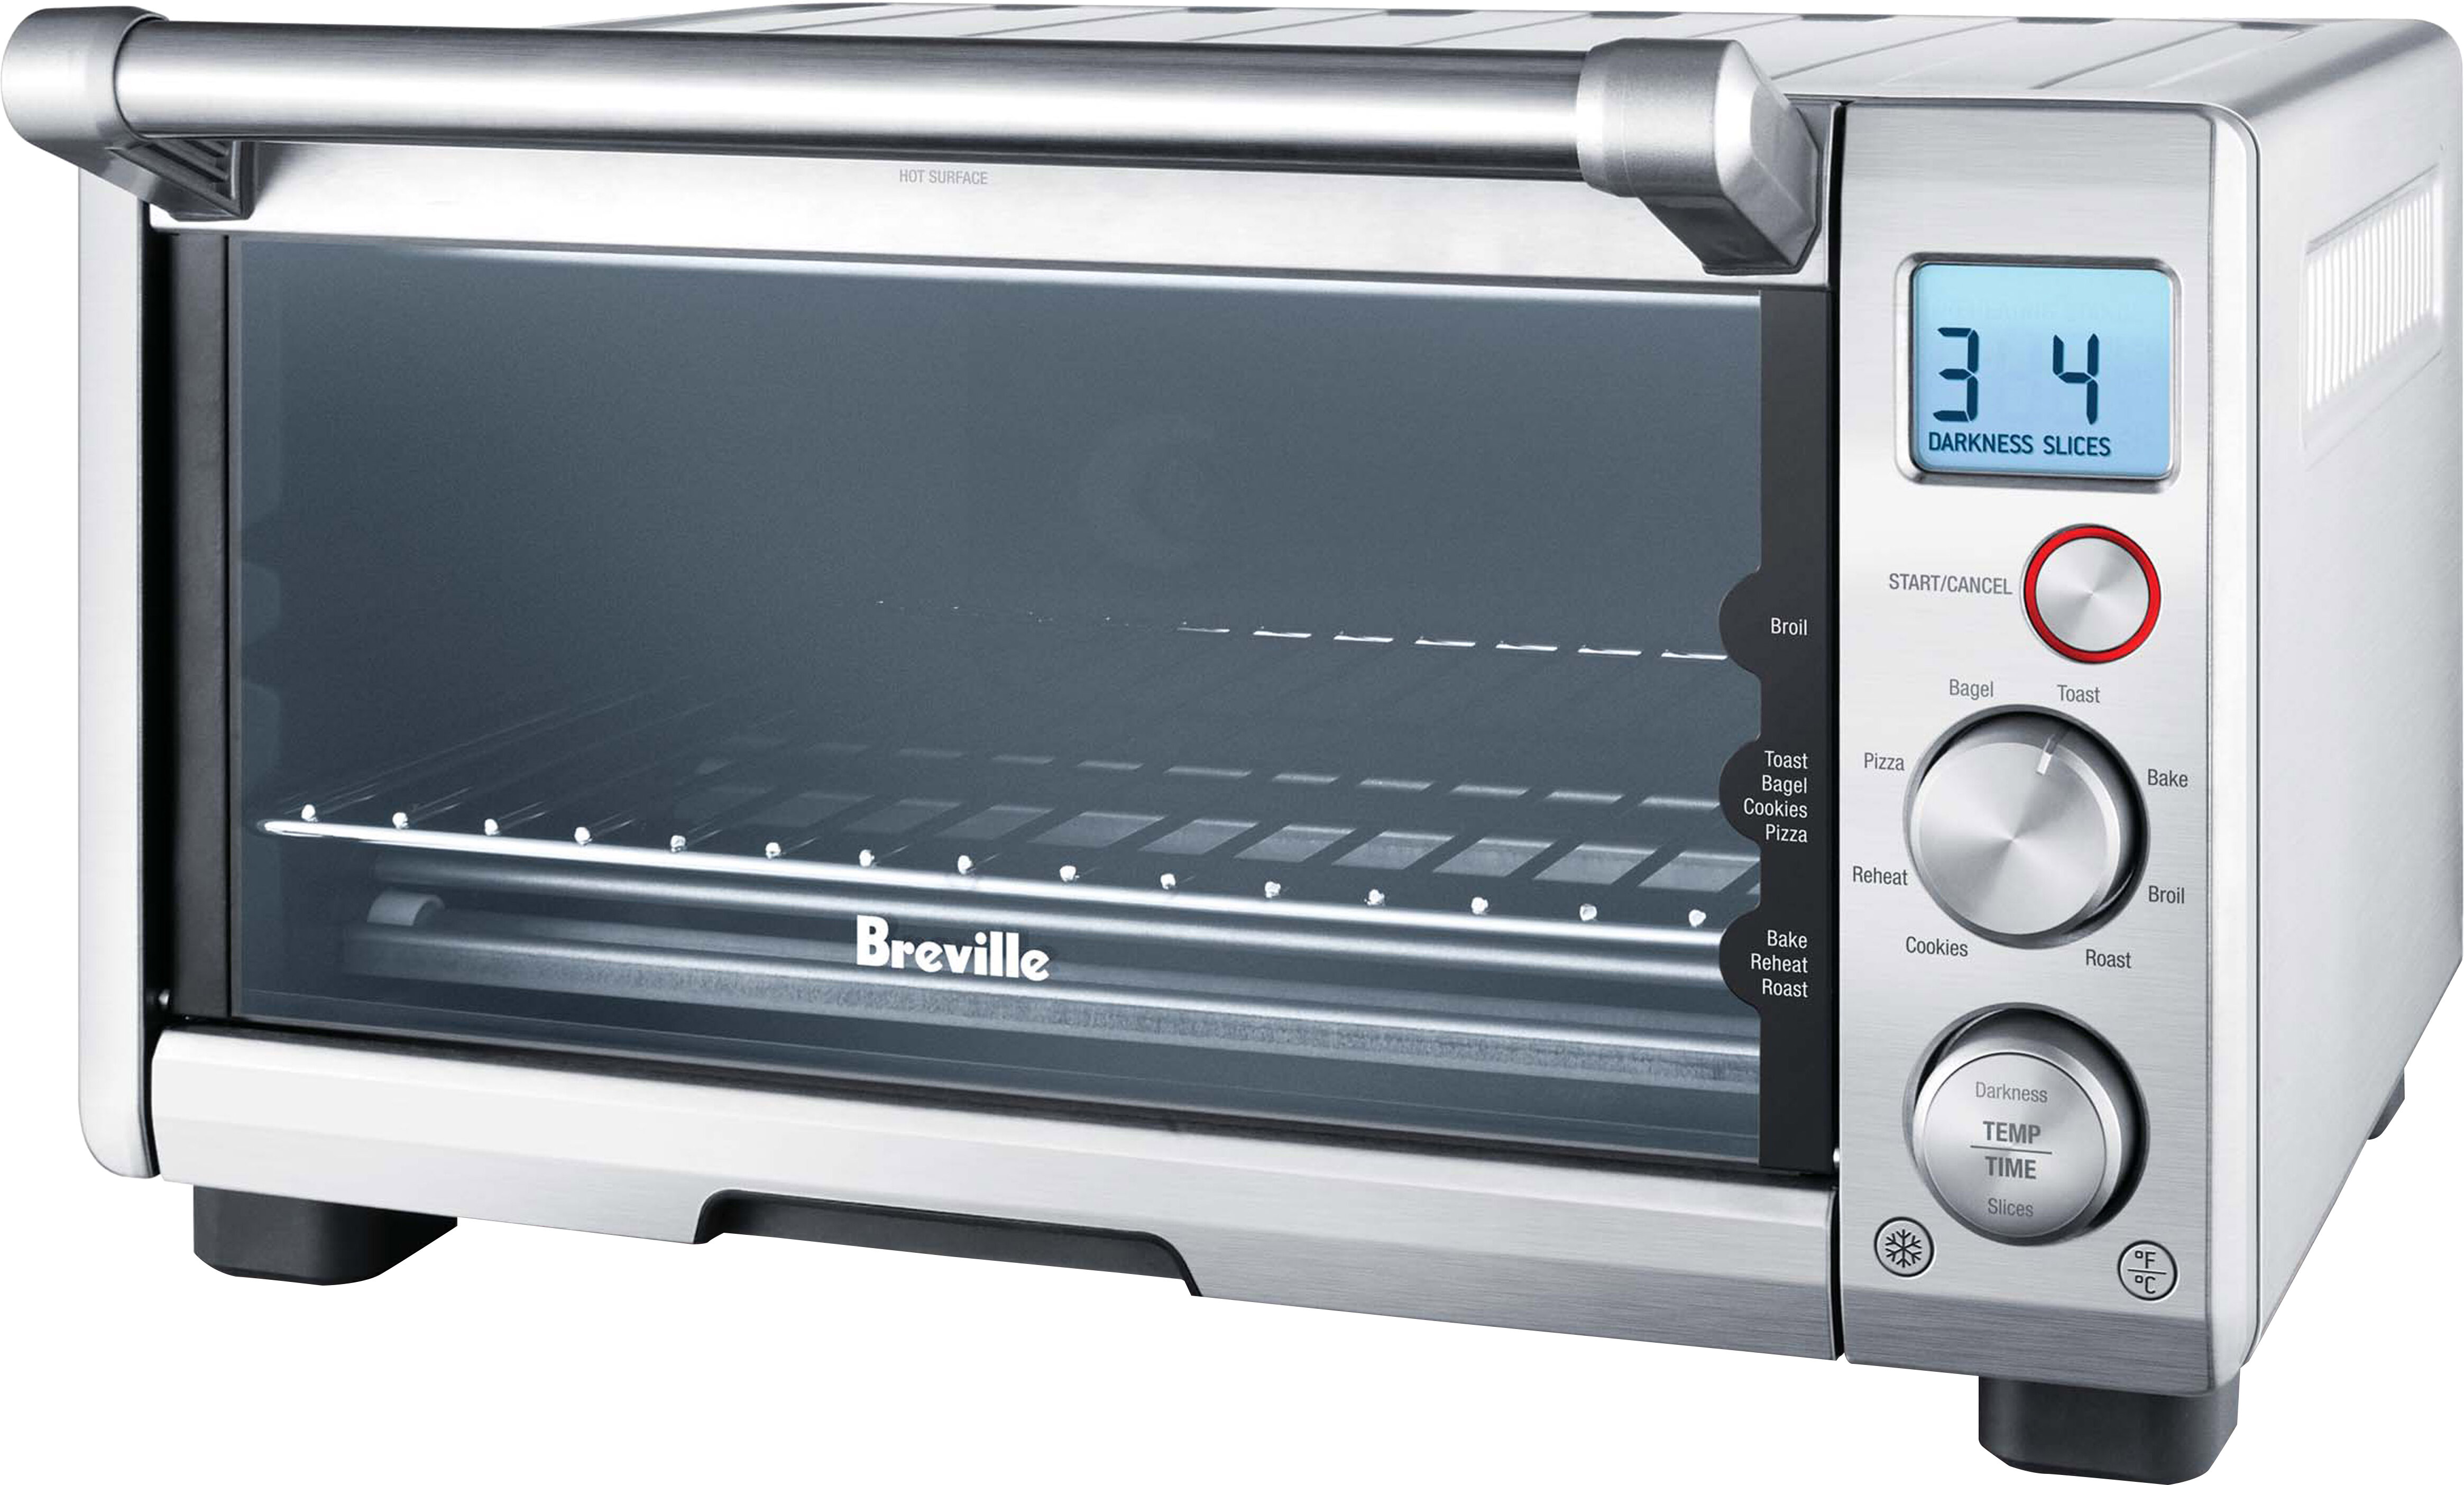 Breville Microwave Convection Oven ComboBestMicrowave